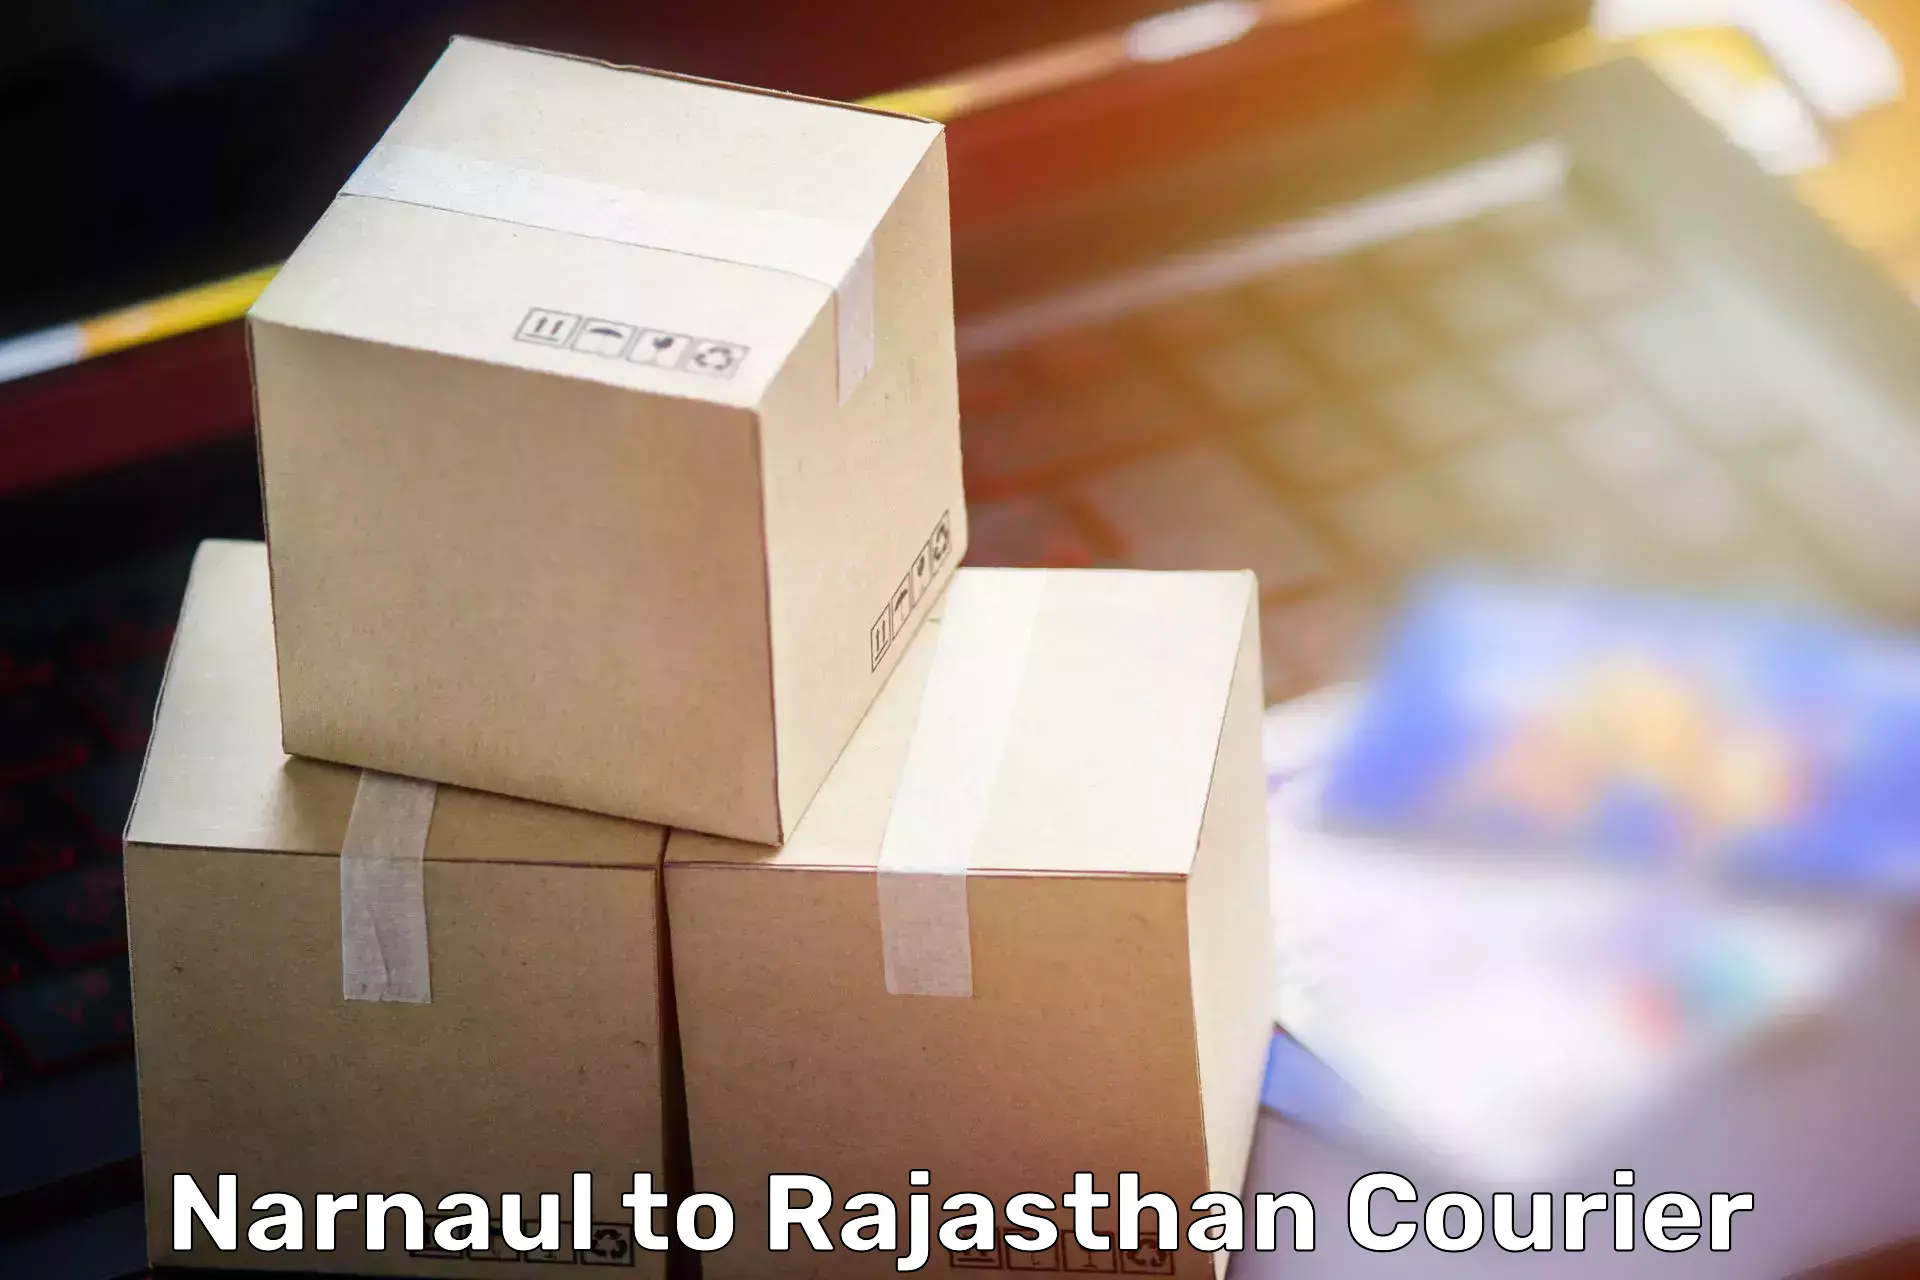 Furniture delivery service Narnaul to Lohawat